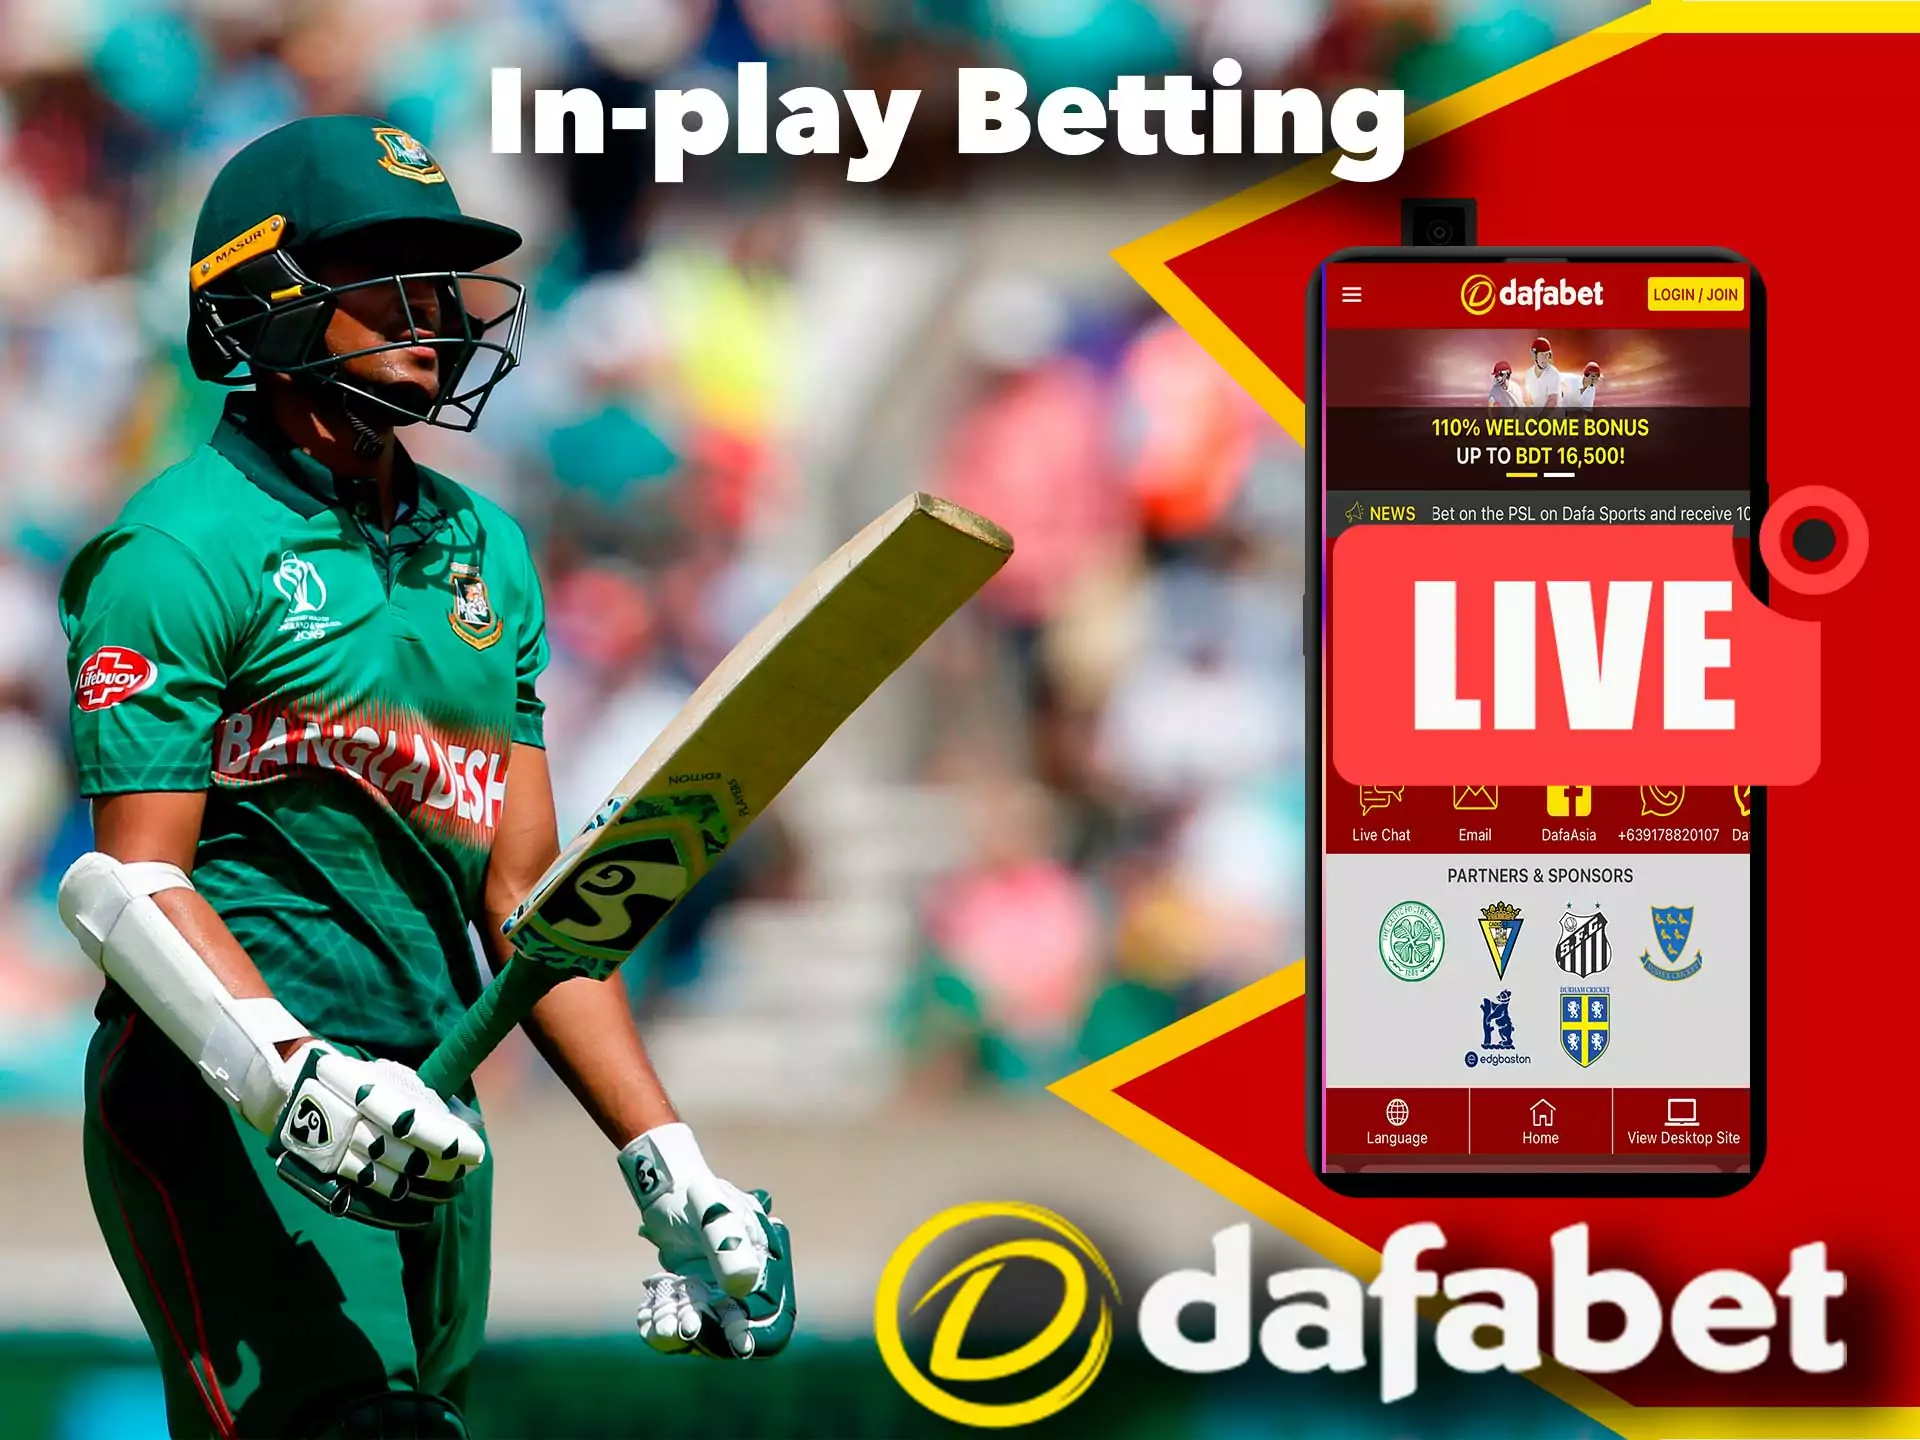 Place a bet in real time at Dafabet.